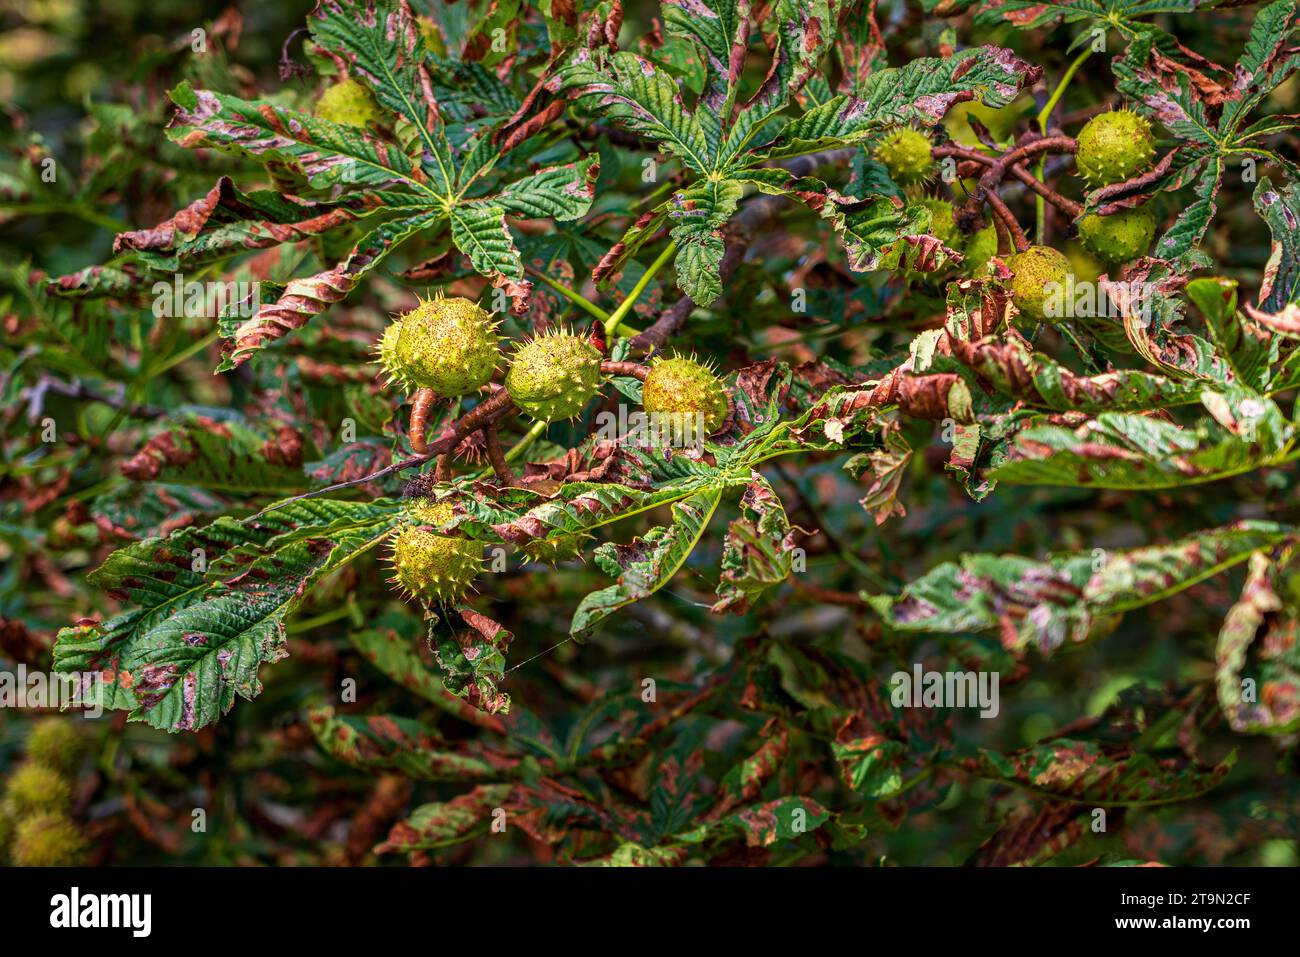 Chestnut tree with chestnuts in autumn. Stock Photo